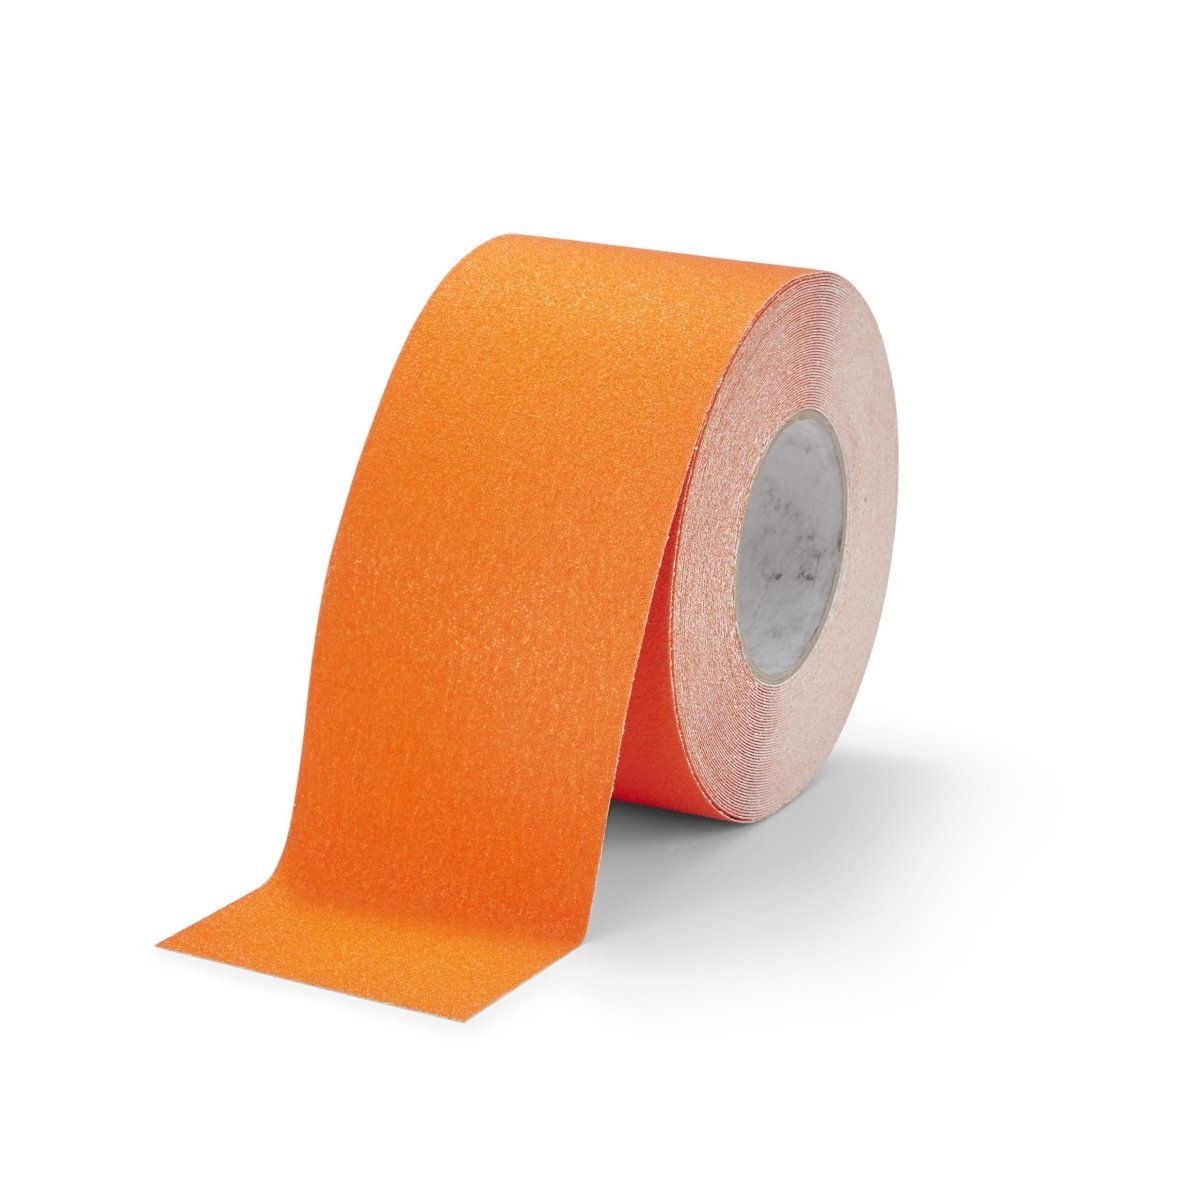 Conformable Traction Grade Anti Slip Tape Rolls - Slips Away - Conformable Anti-Slip Tape - H3406O-Conformable-Safety-Grip-Orange-100mm.-1 -